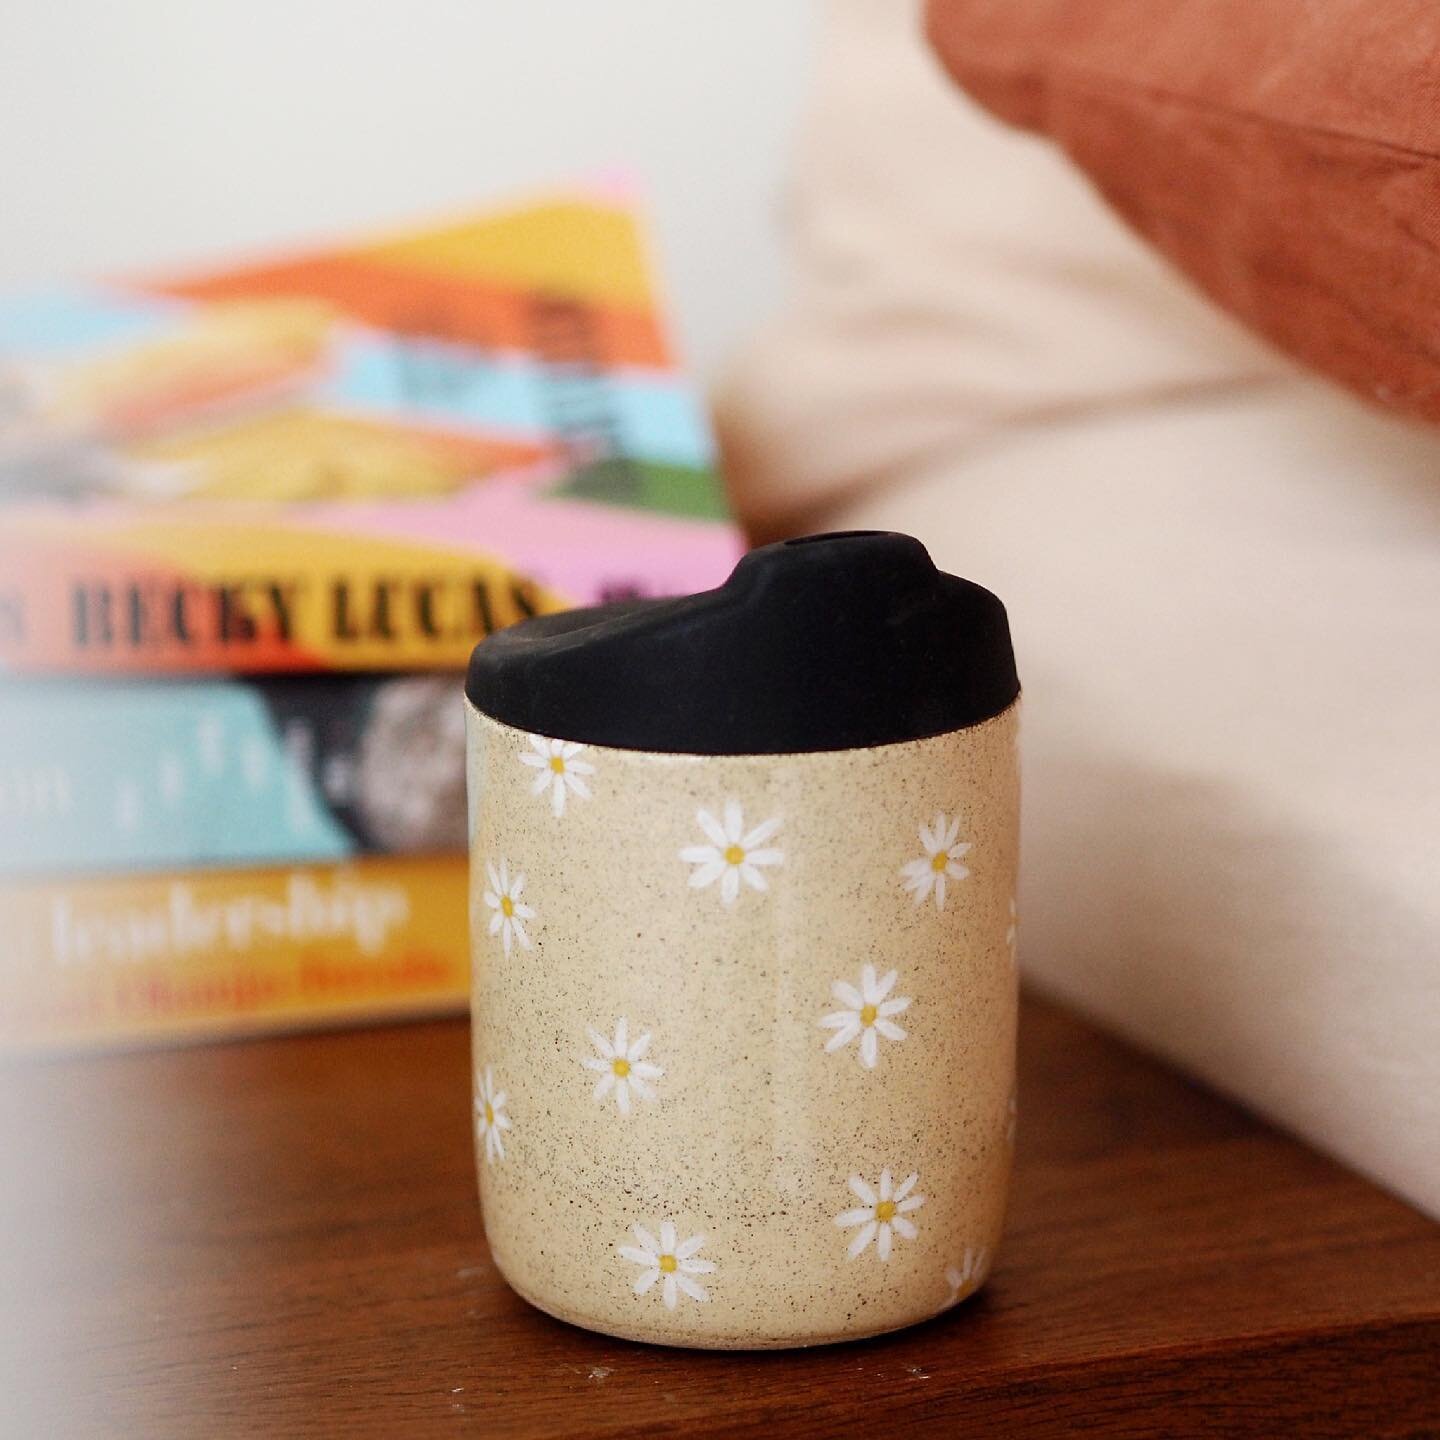 Here&rsquo;s a gentle reminder to sign up to the newsletter so you&rsquo;re the very first to hear about the upcoming release date of the daisy reusable clay cups. 

And here&rsquo;s your not so gentle reminder to get your mitts on @beckylucas__ new 